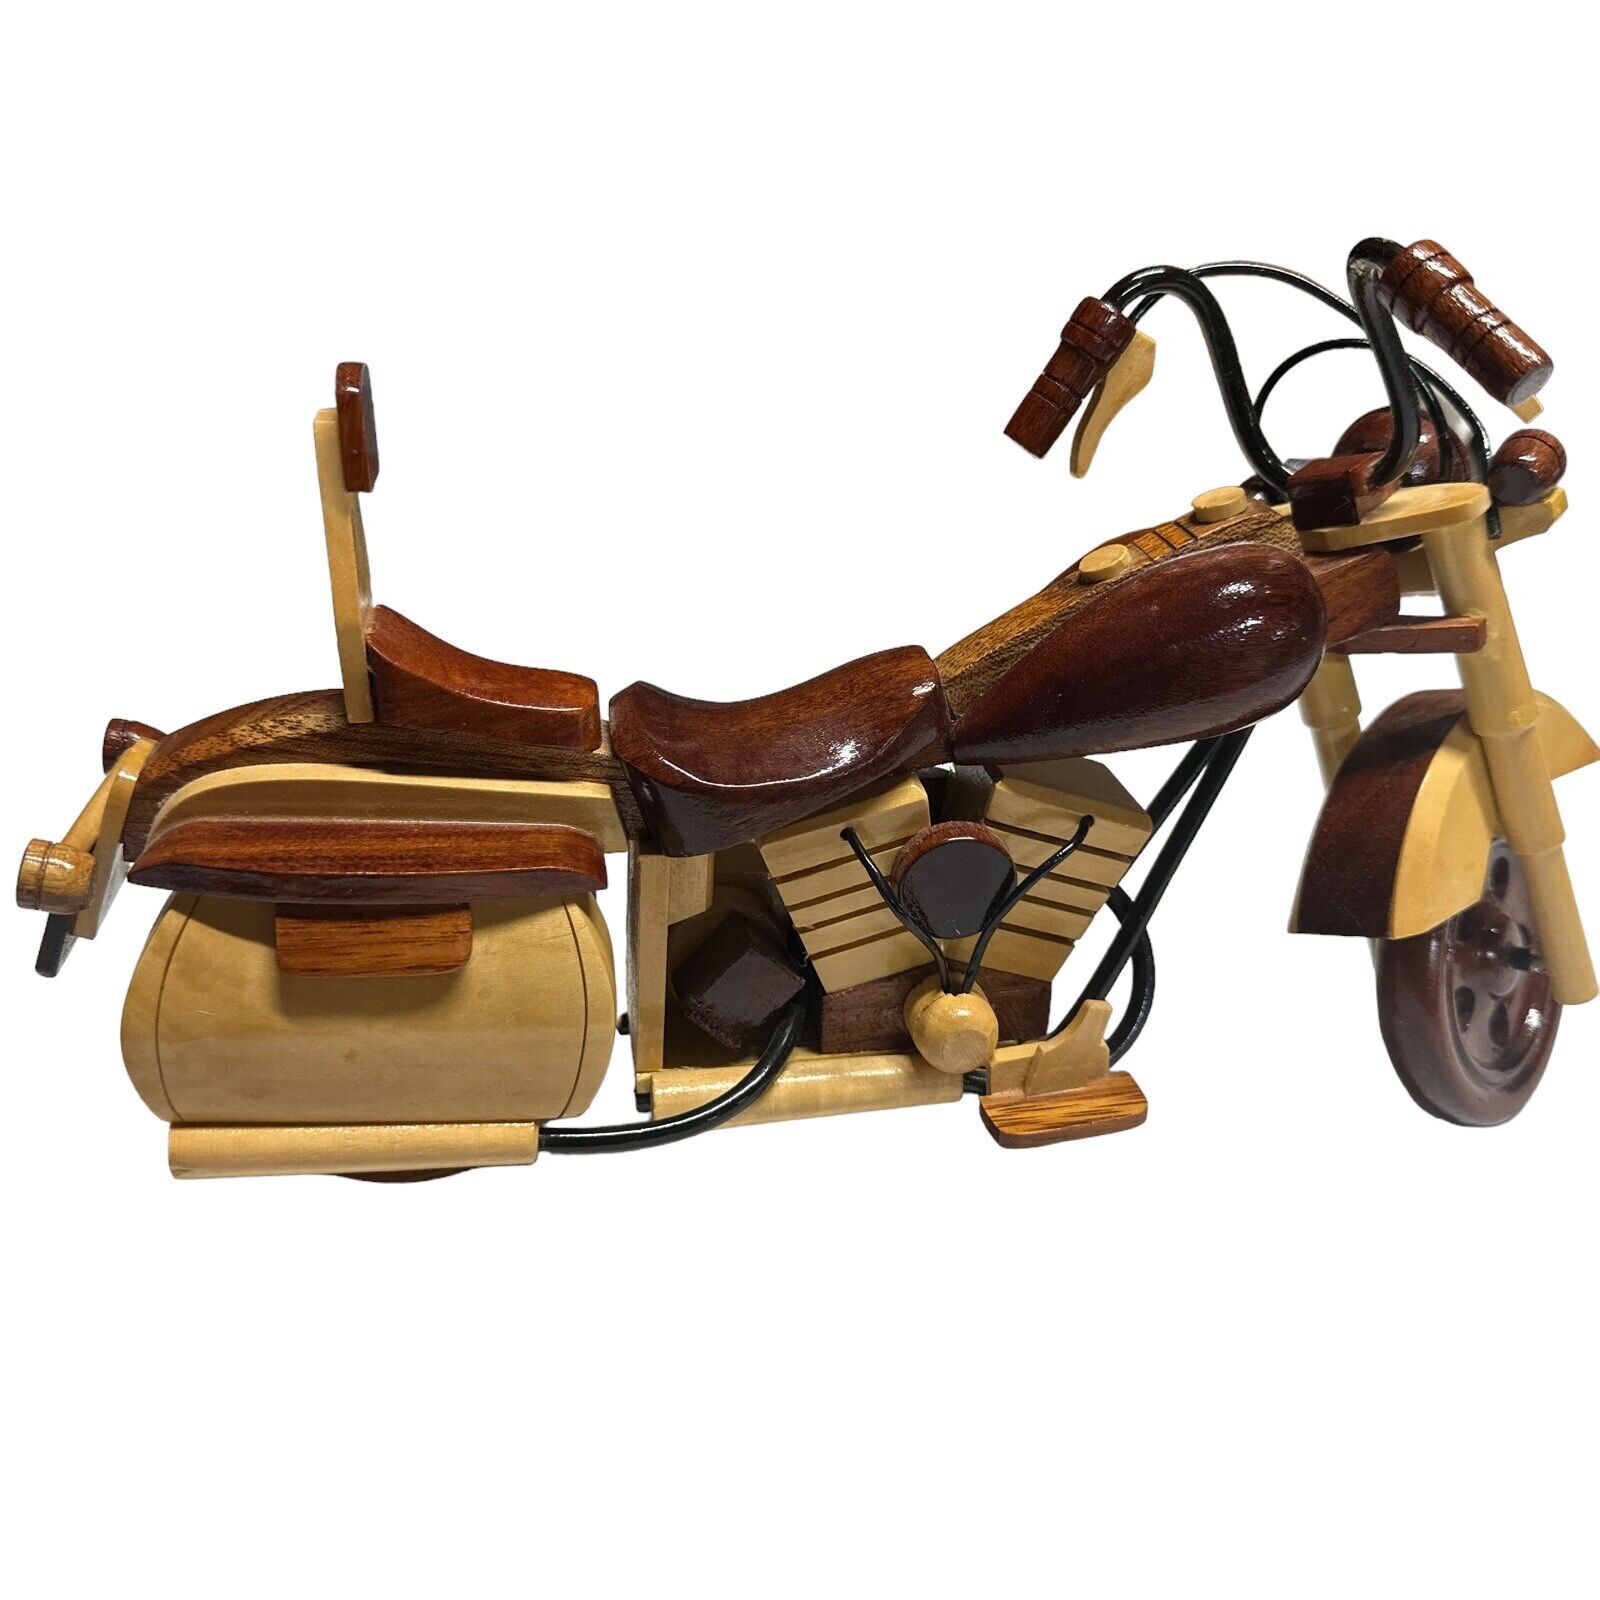 Large Handmade Wooden Motorcycle Model - Harley Indian Style - Wheels Move